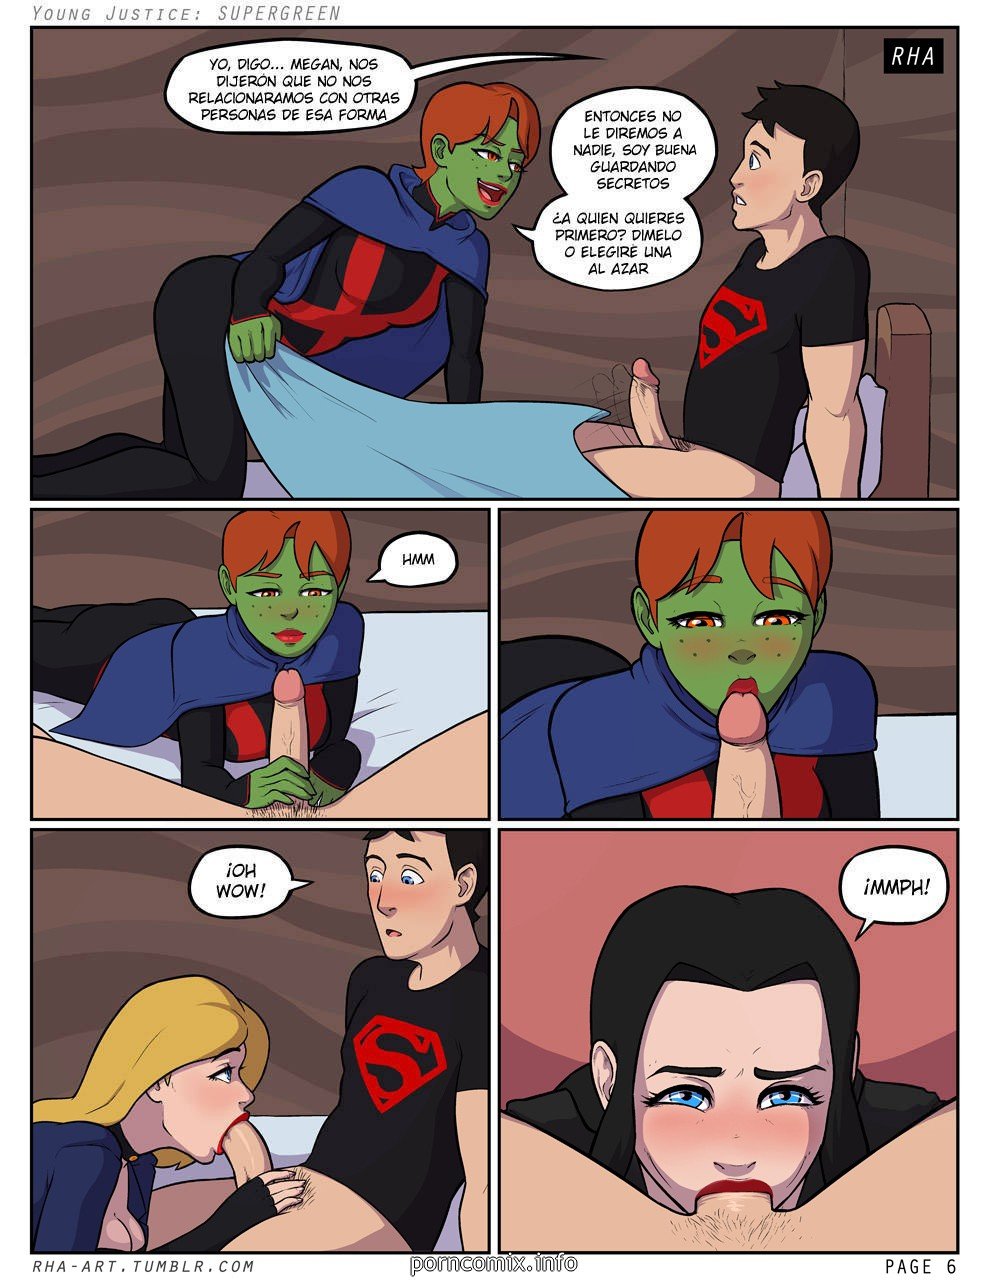 Young Justice – Supergreen - 6